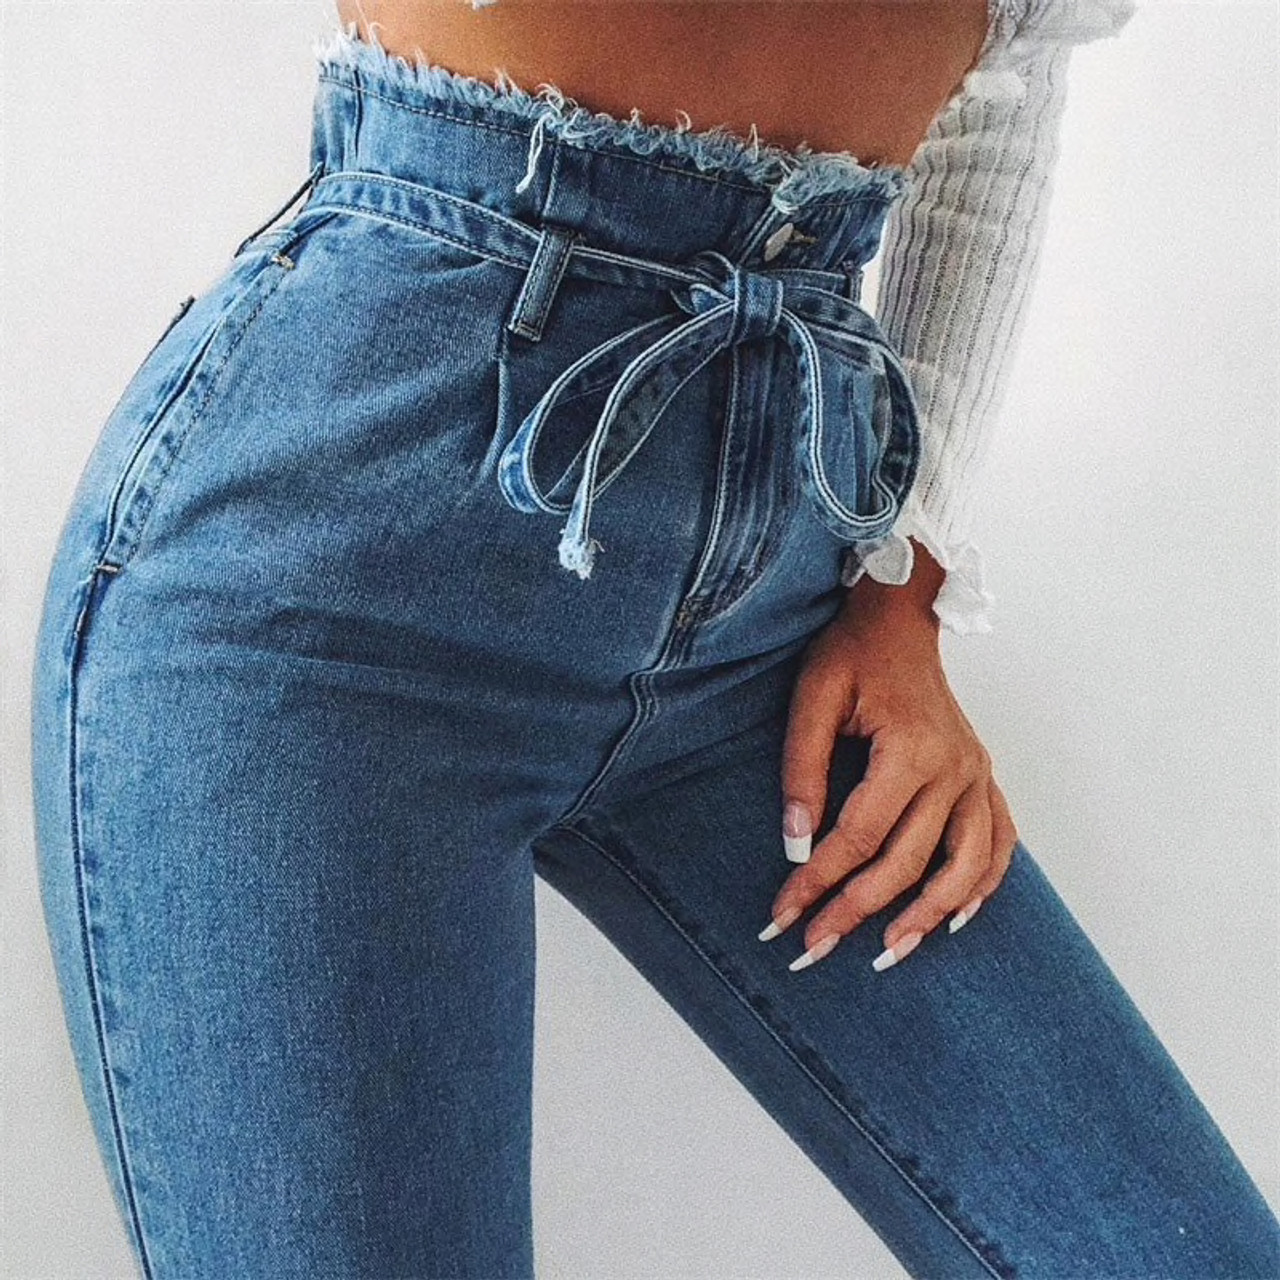 Jeans Aricaca High Quality Women M2XL Cat Embroidered Jeans Harem Pants  Elastic Waist Loose Jeans From Edyvp, $39.02 | DHgate.Com